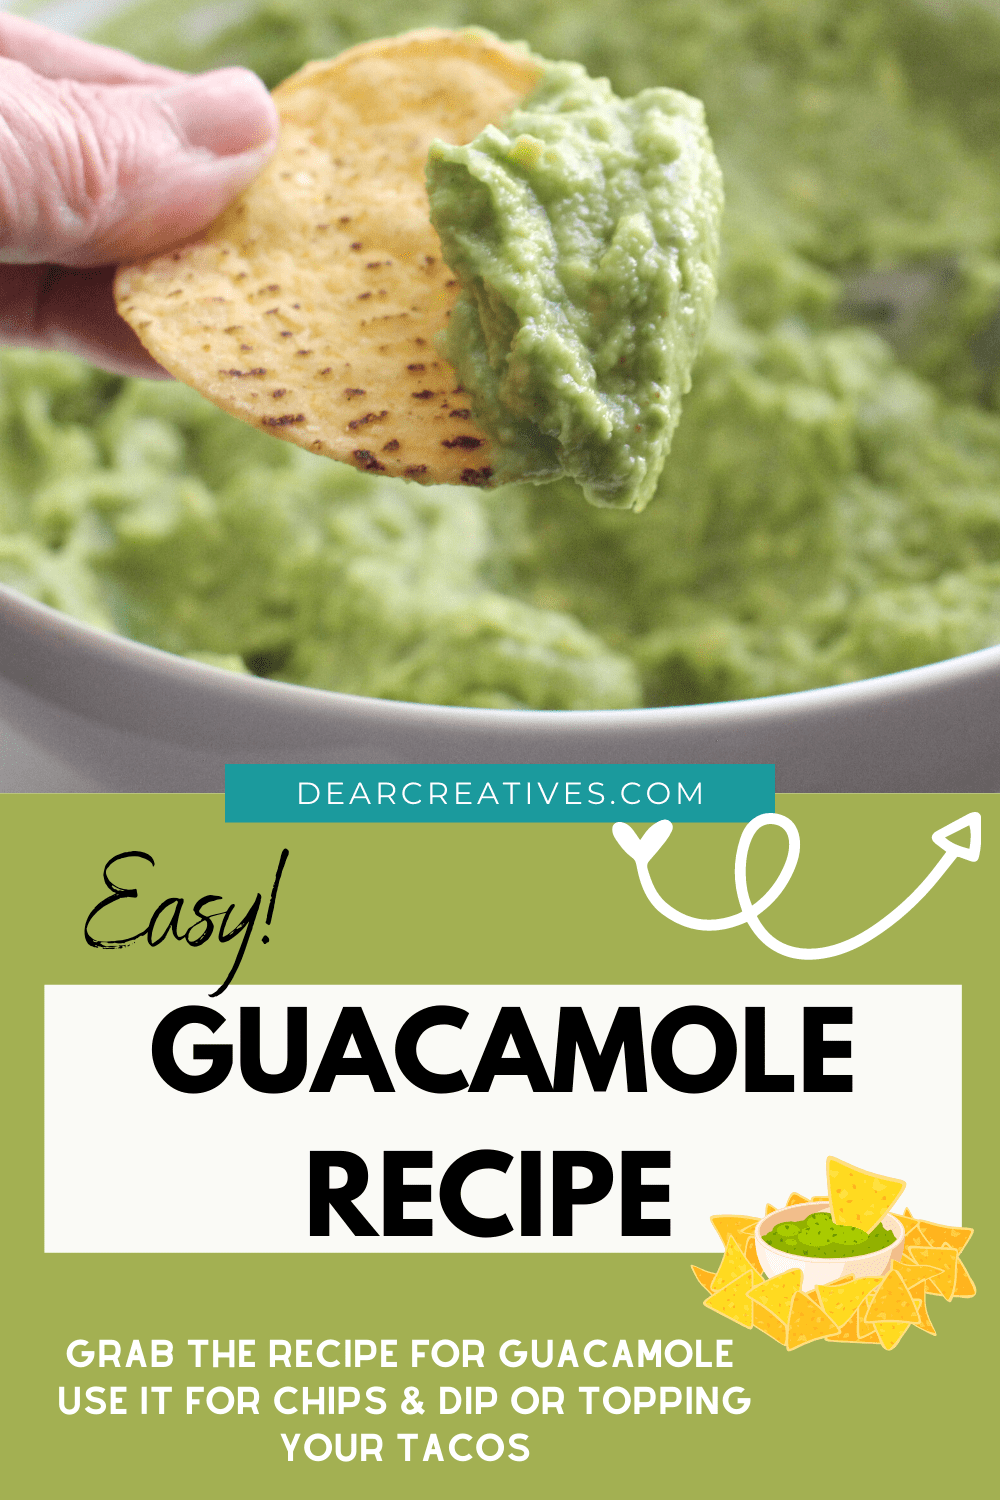 Easy Guacamole Recipe Is Simply The Best!